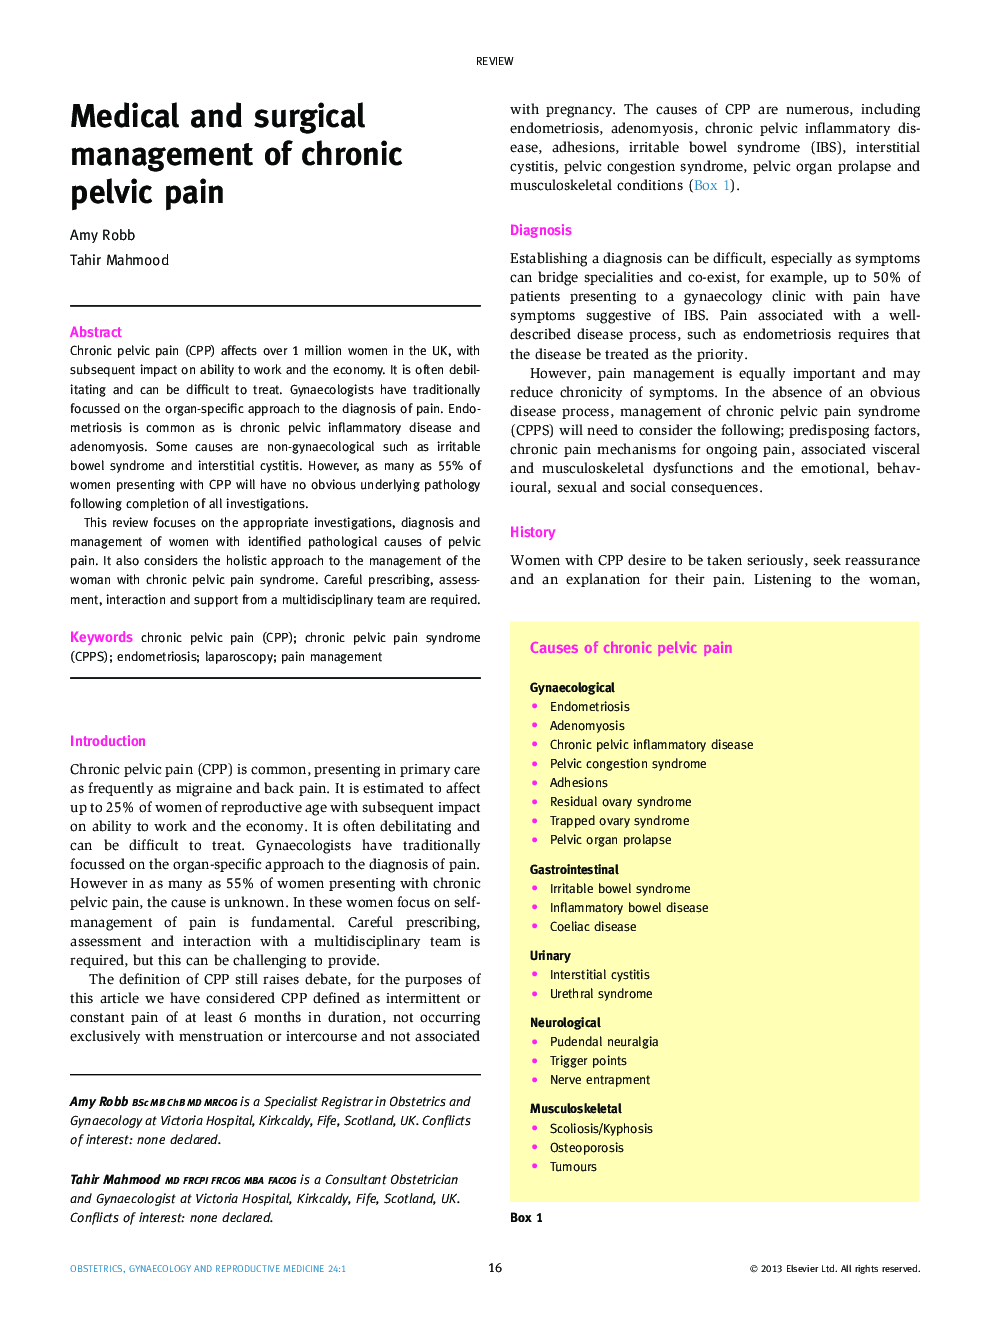 Medical and surgical management of chronic pelvic pain